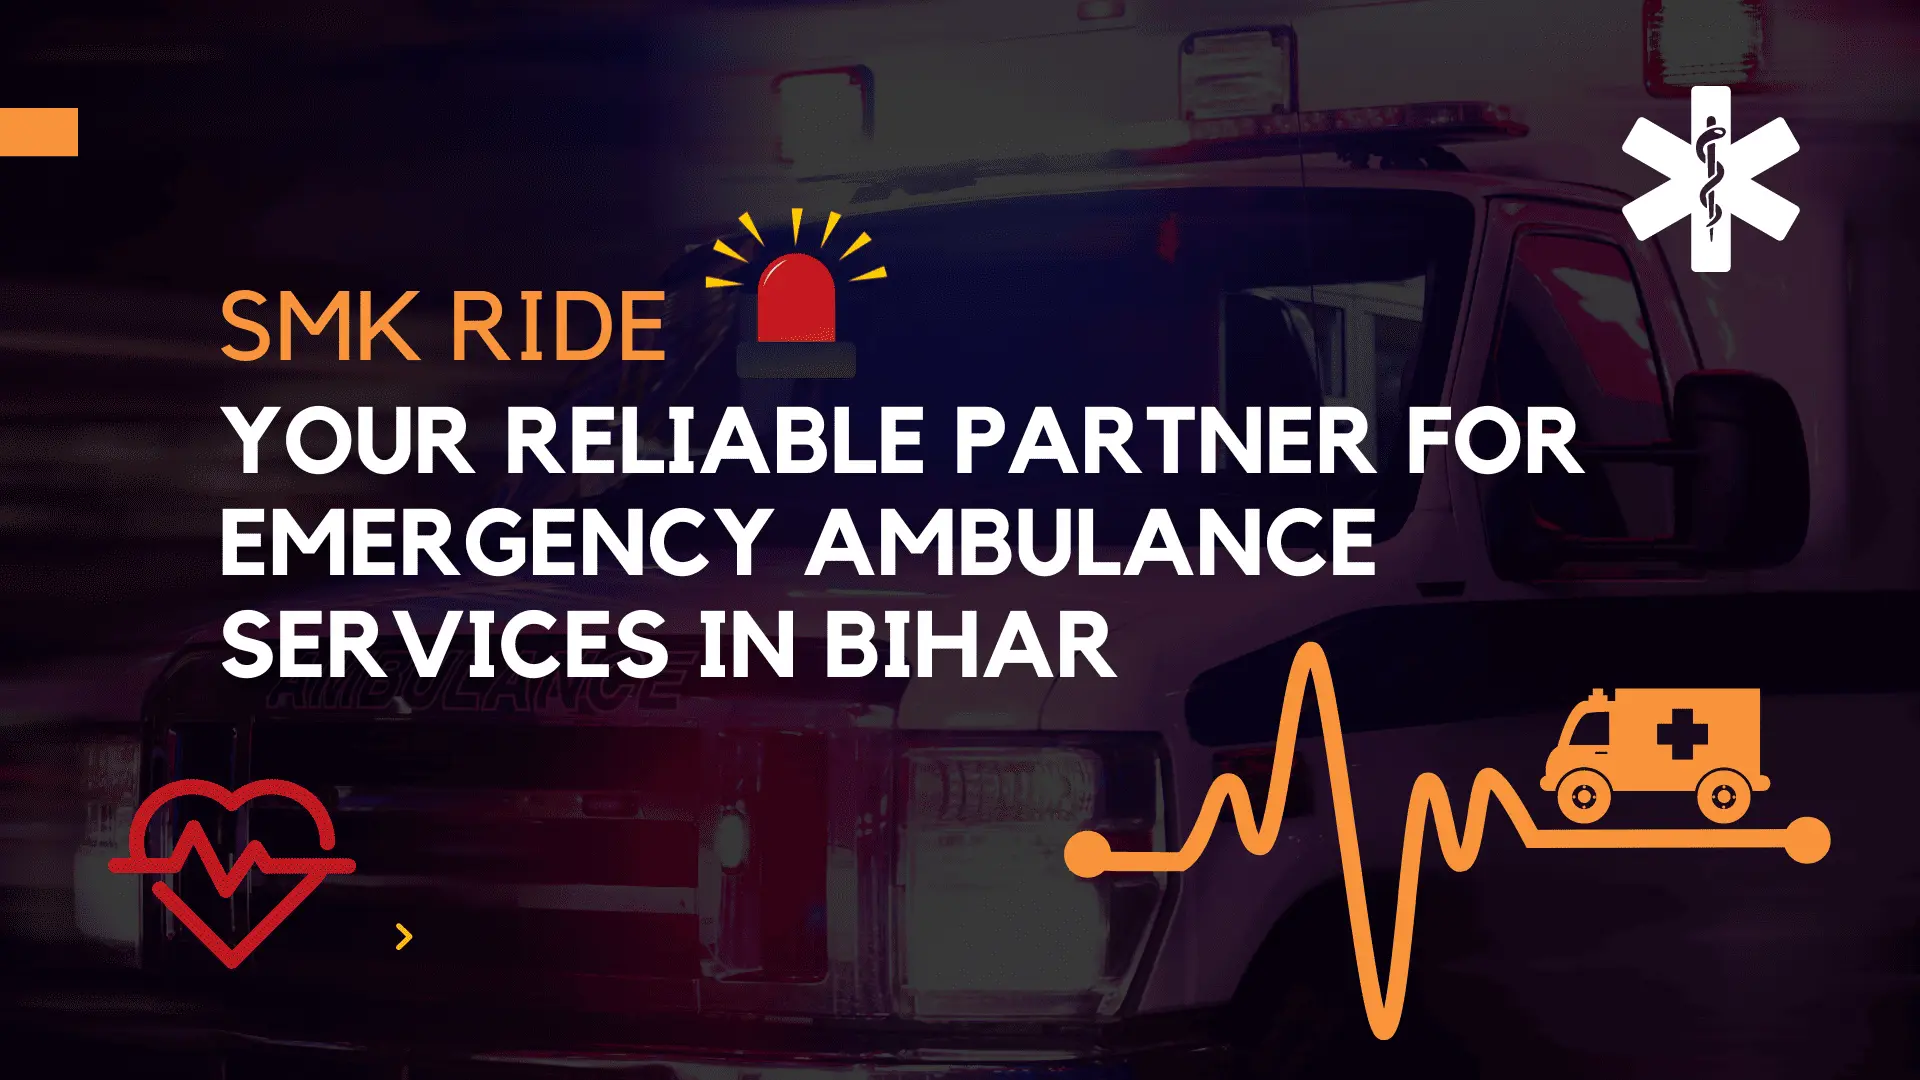 Get 24*7 Emergency Ambulance Services in Bihar With SMK Ride